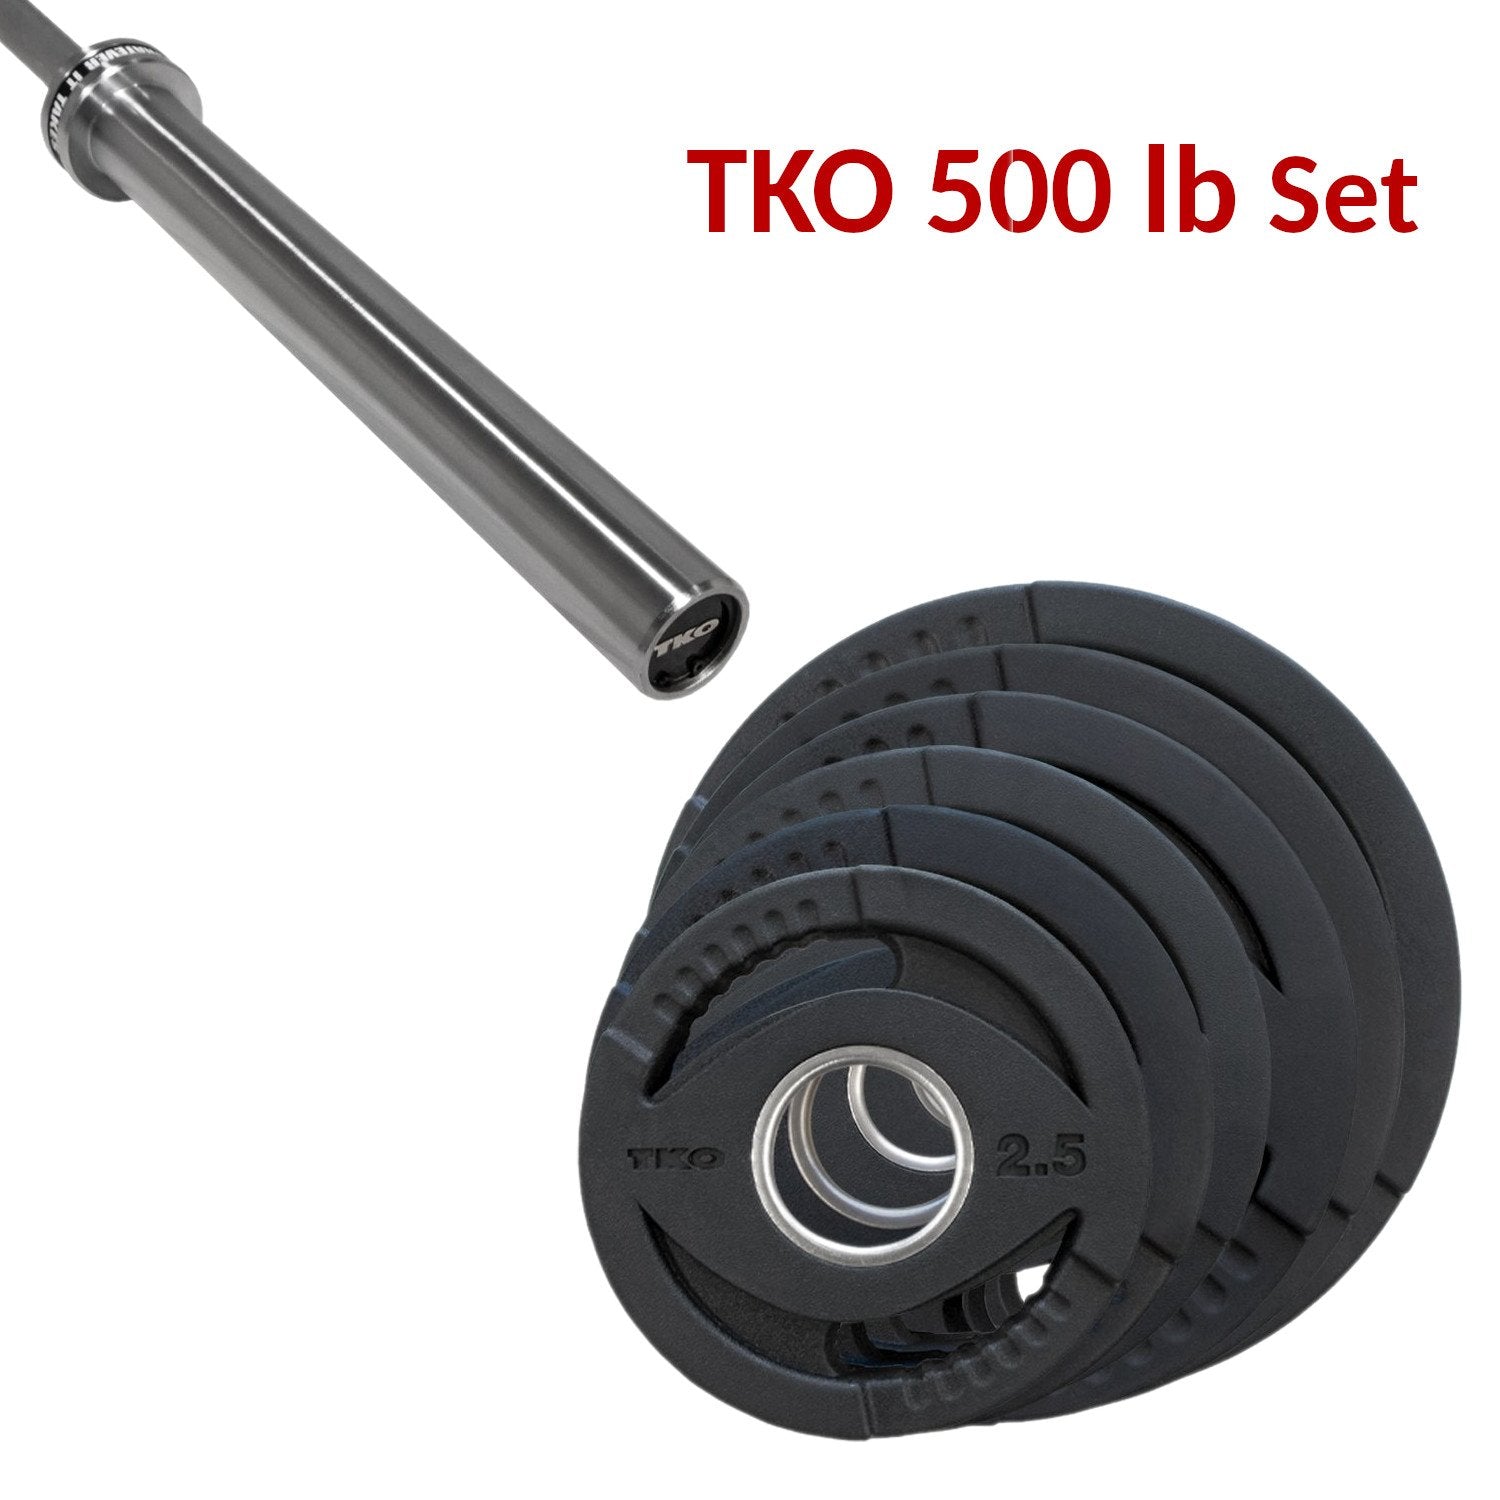 TKO 500 lb Olympic Rubber Plate Set Combo with TKO Olympic Bar.